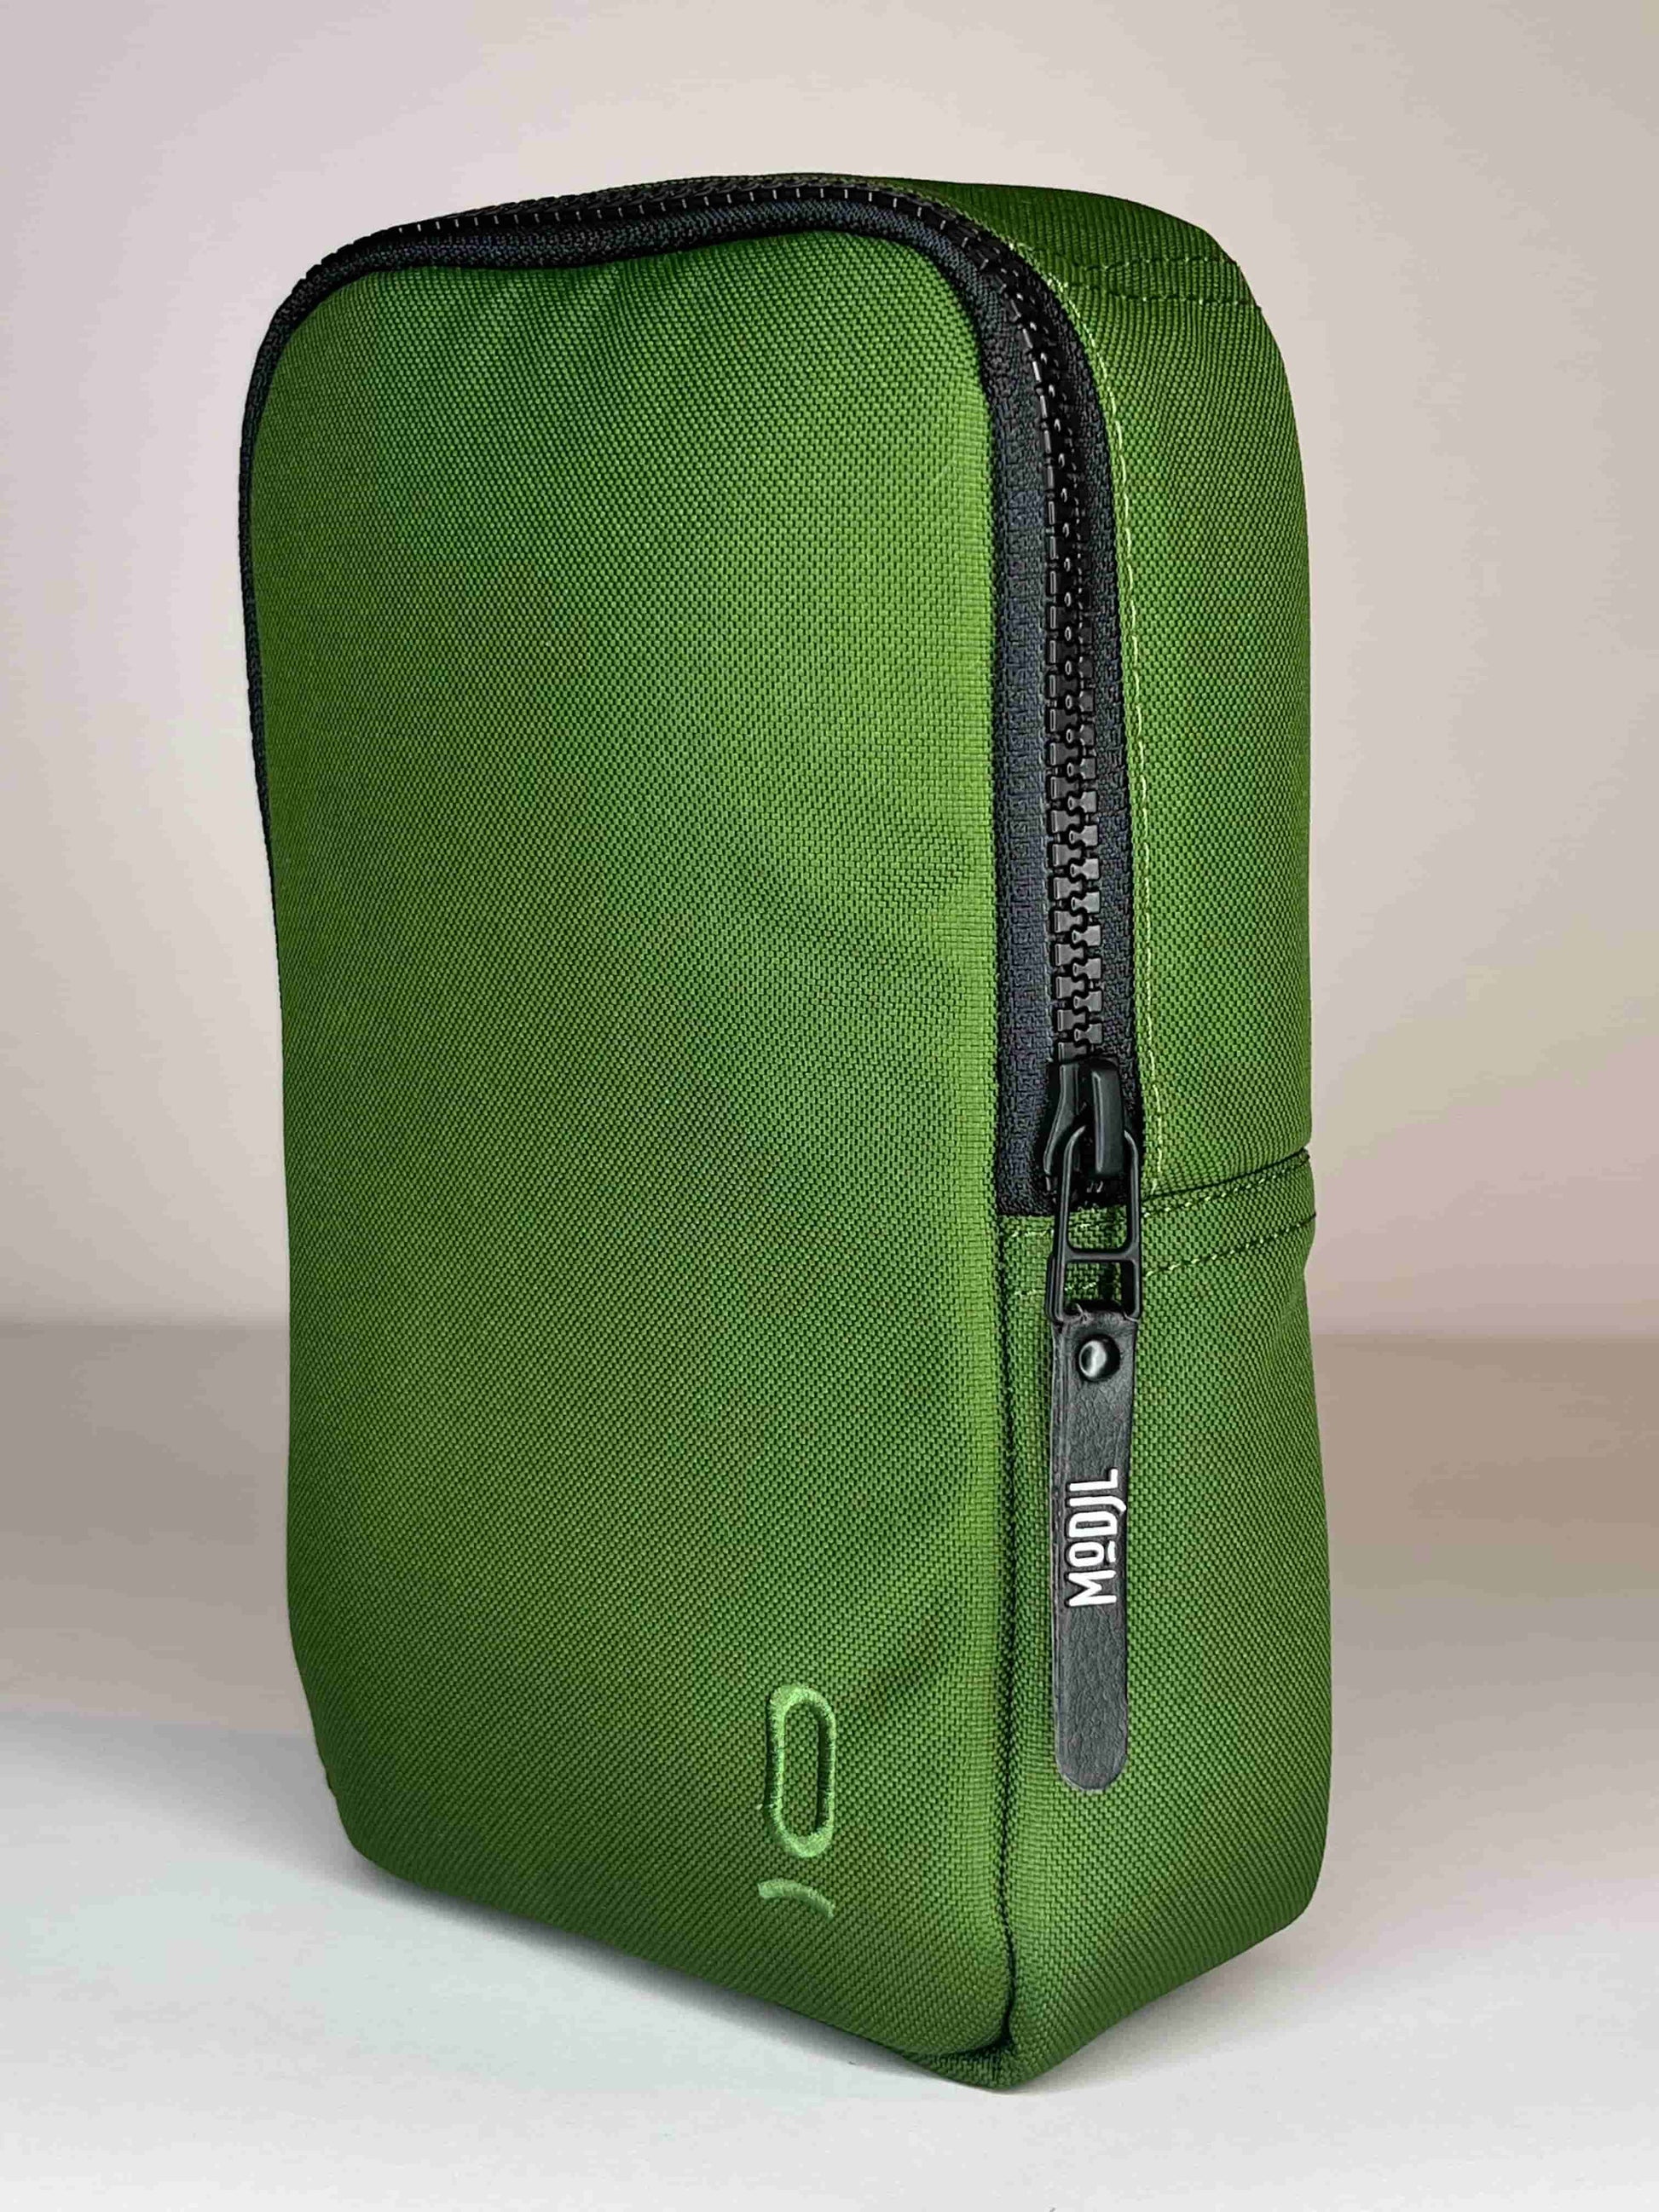 the-slim-pouch-modjl-modular-slimpouch-green-side